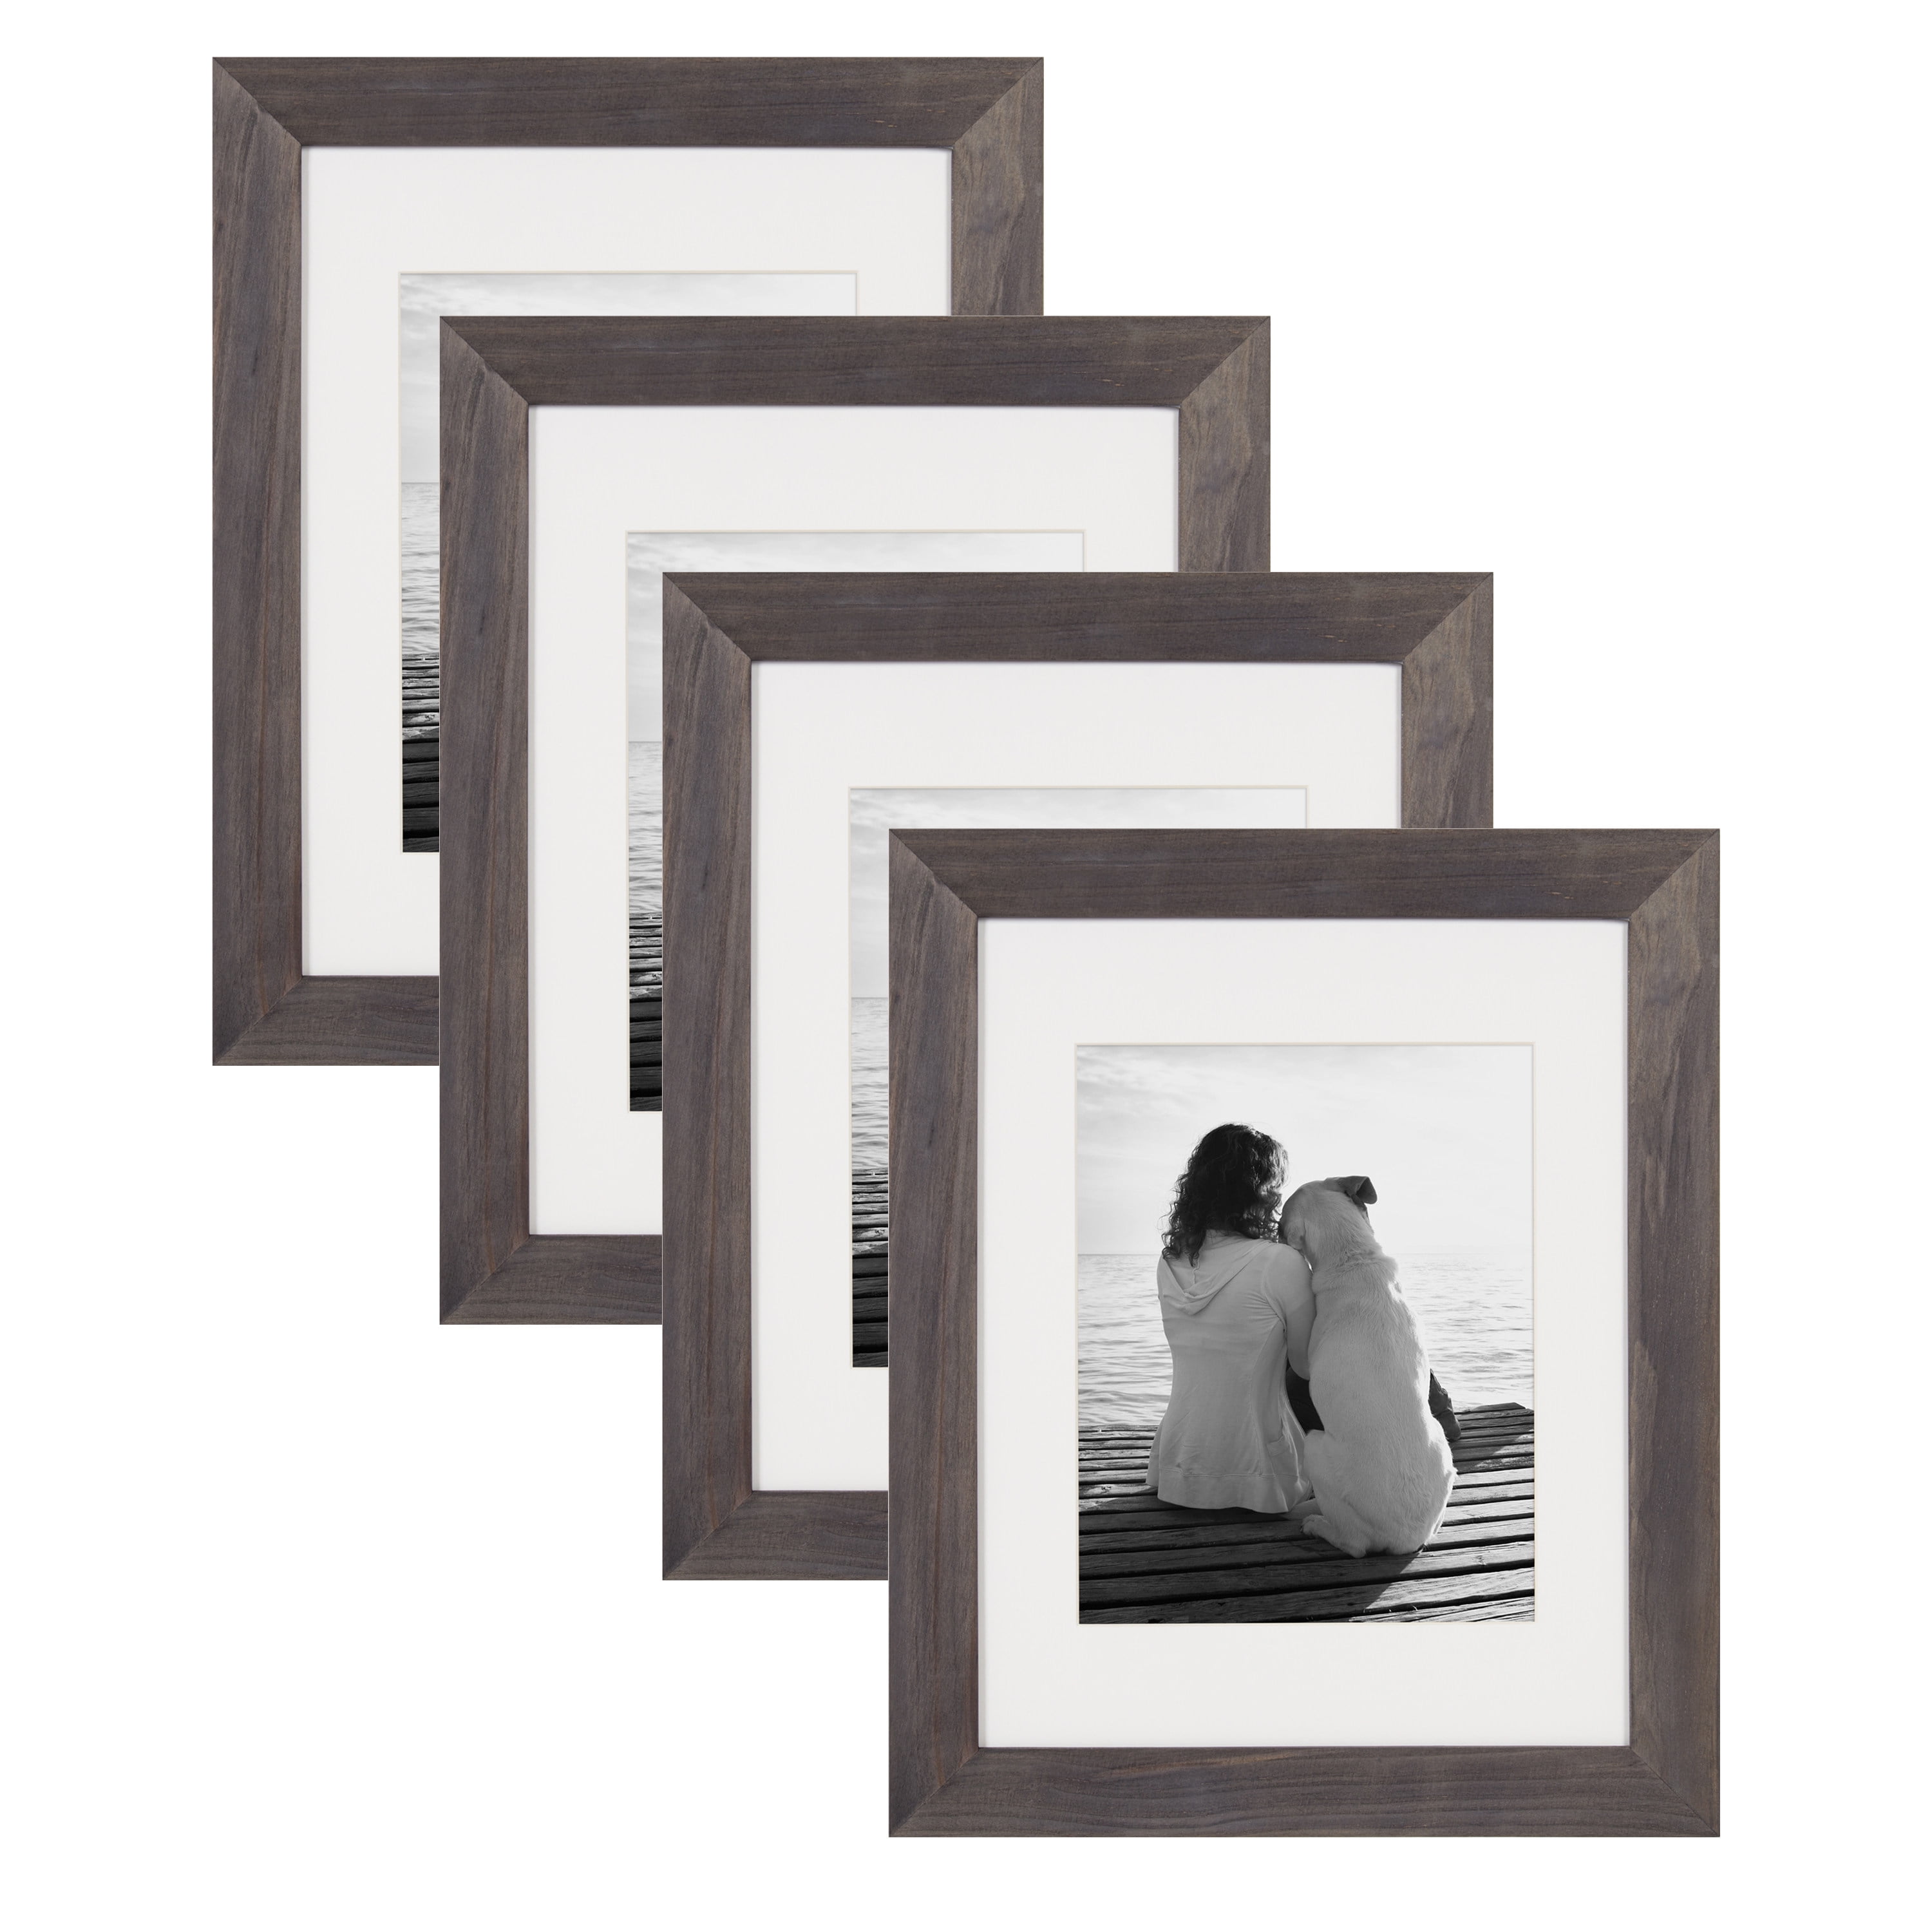 Details about   Photo Picture Frame Glass Set Of 6 Document Format 8x10 Wall Art Home Room Decor 